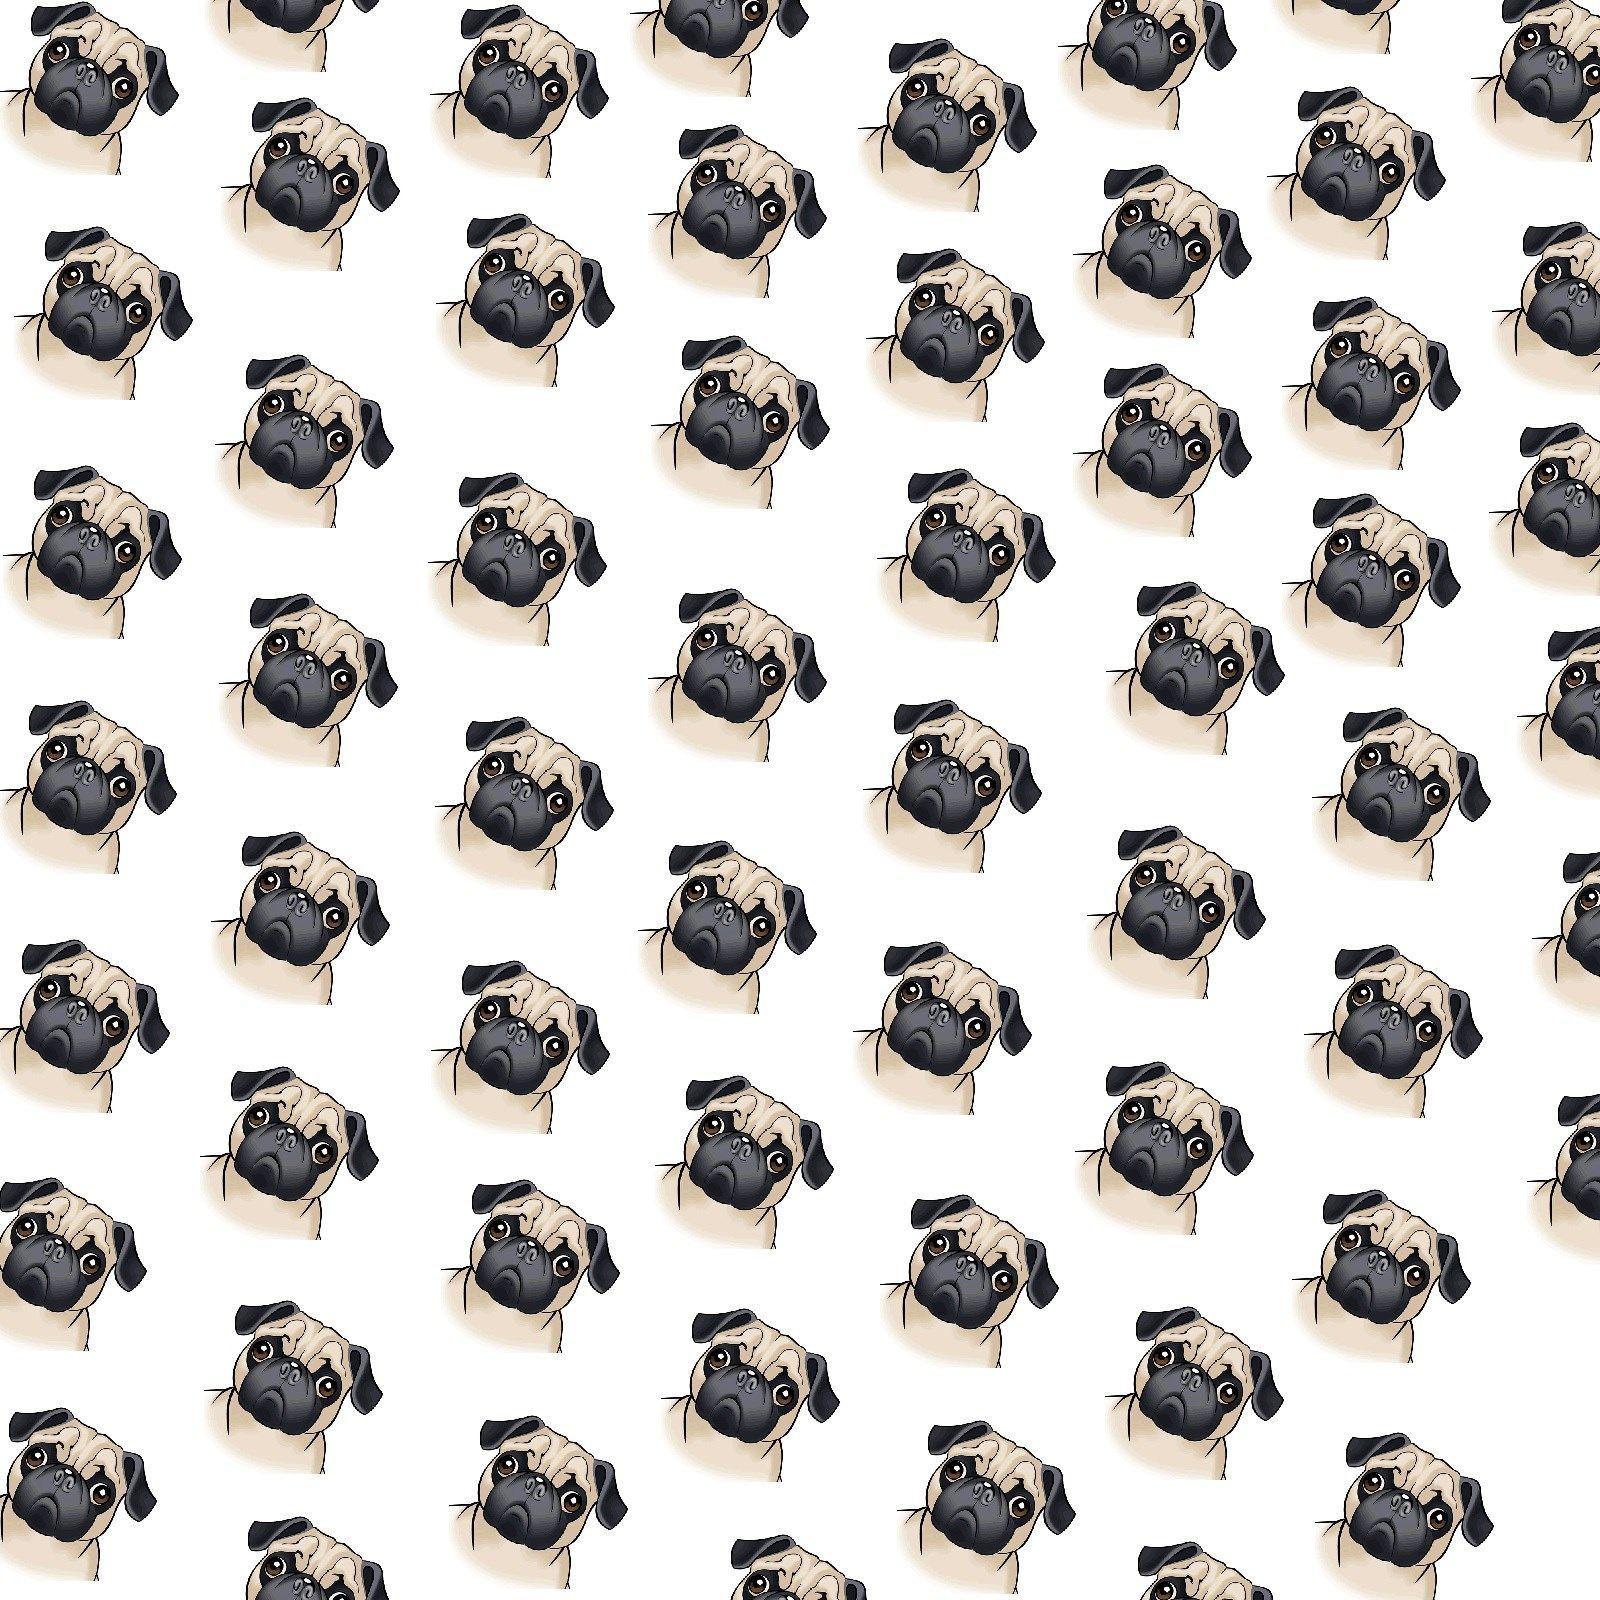 Use this pattern to make a cute Pug Background for your Twitter or